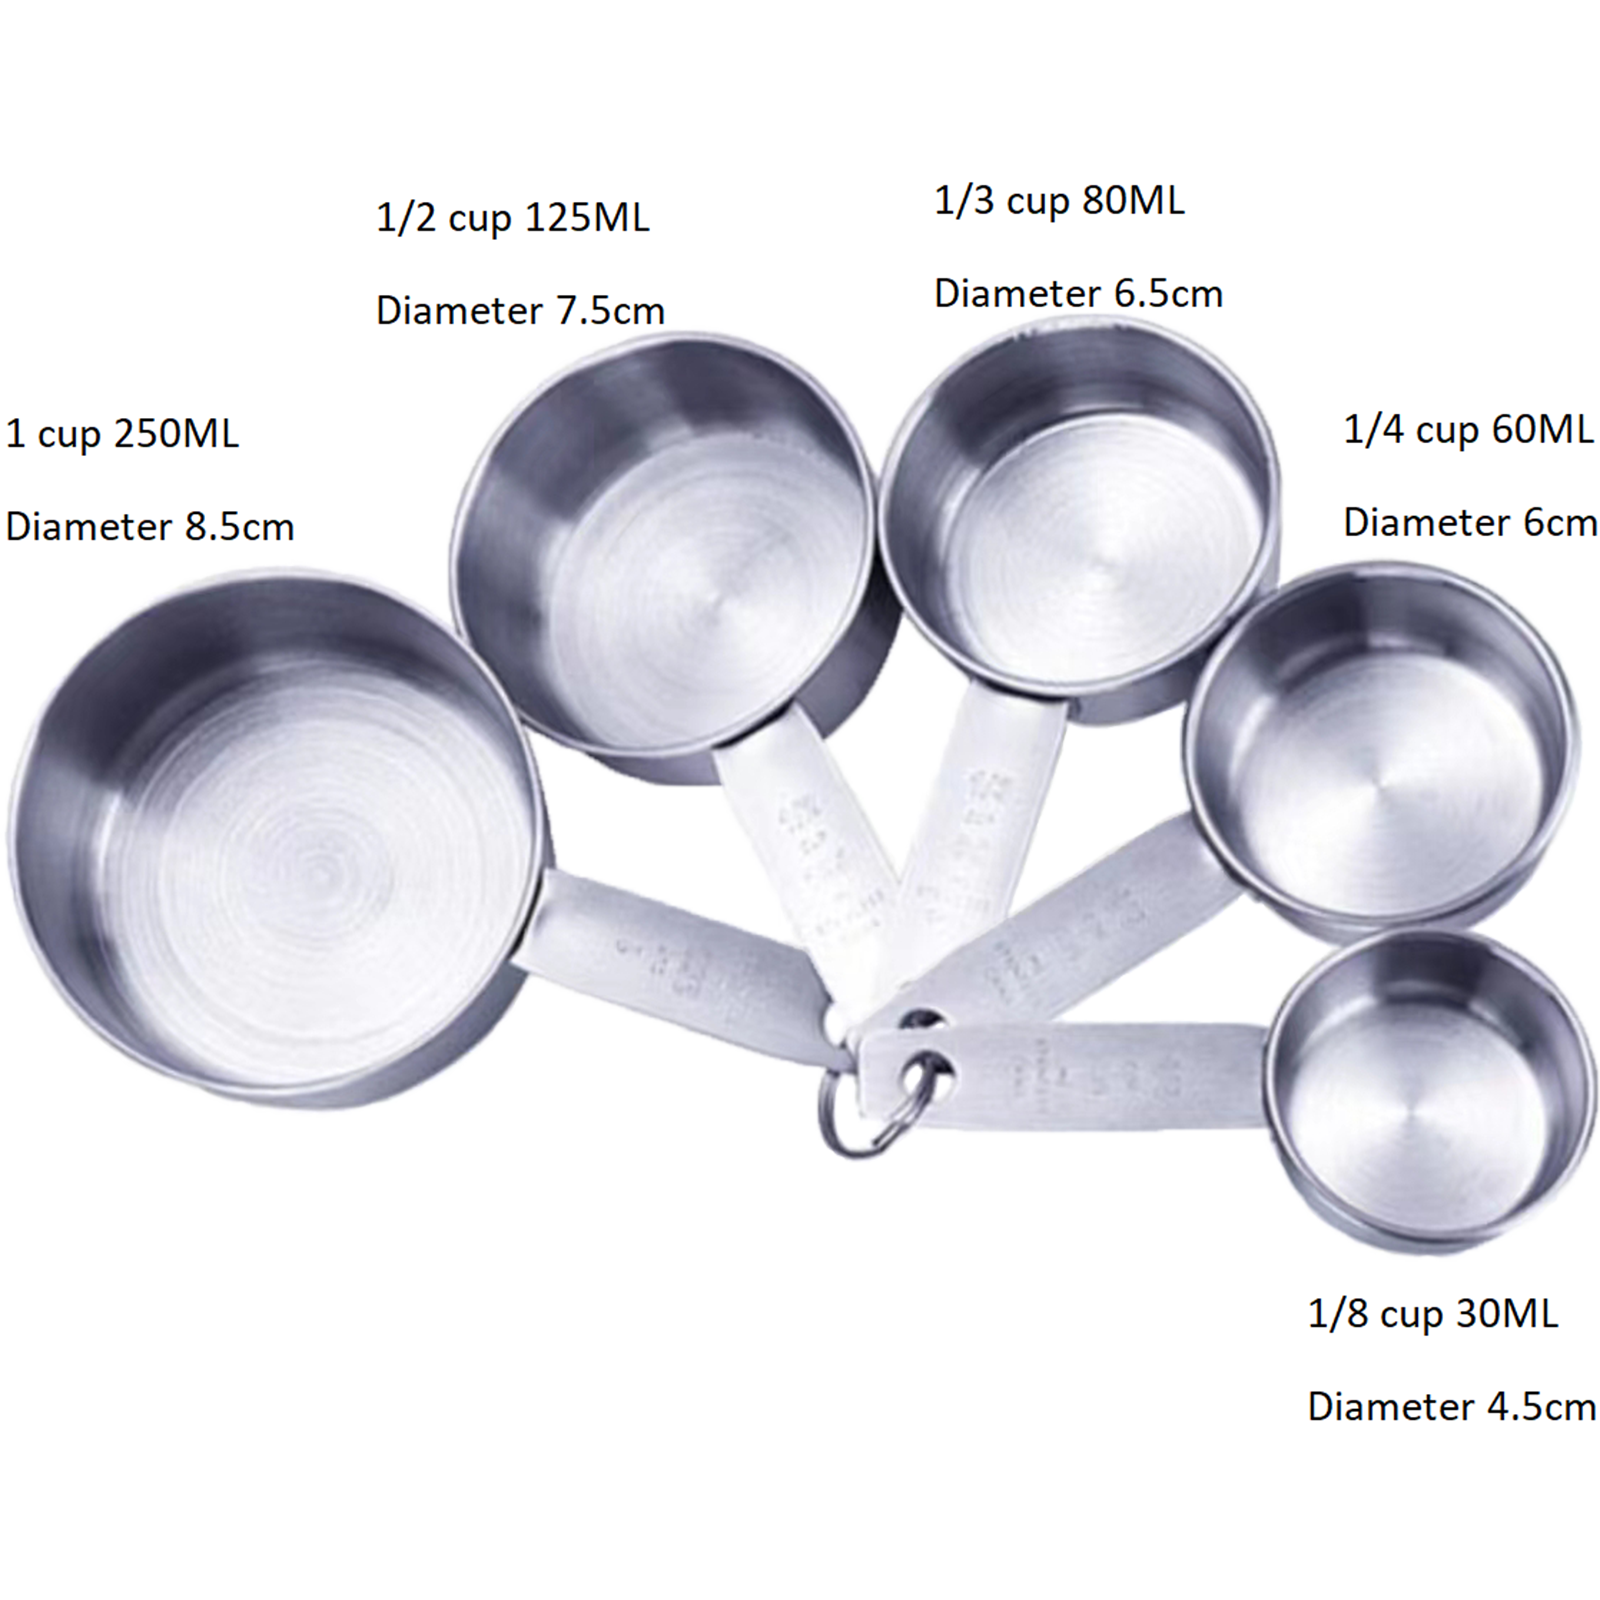 Stainless Steel Measuring Spoons and Cups Set – Curated Kitchenware